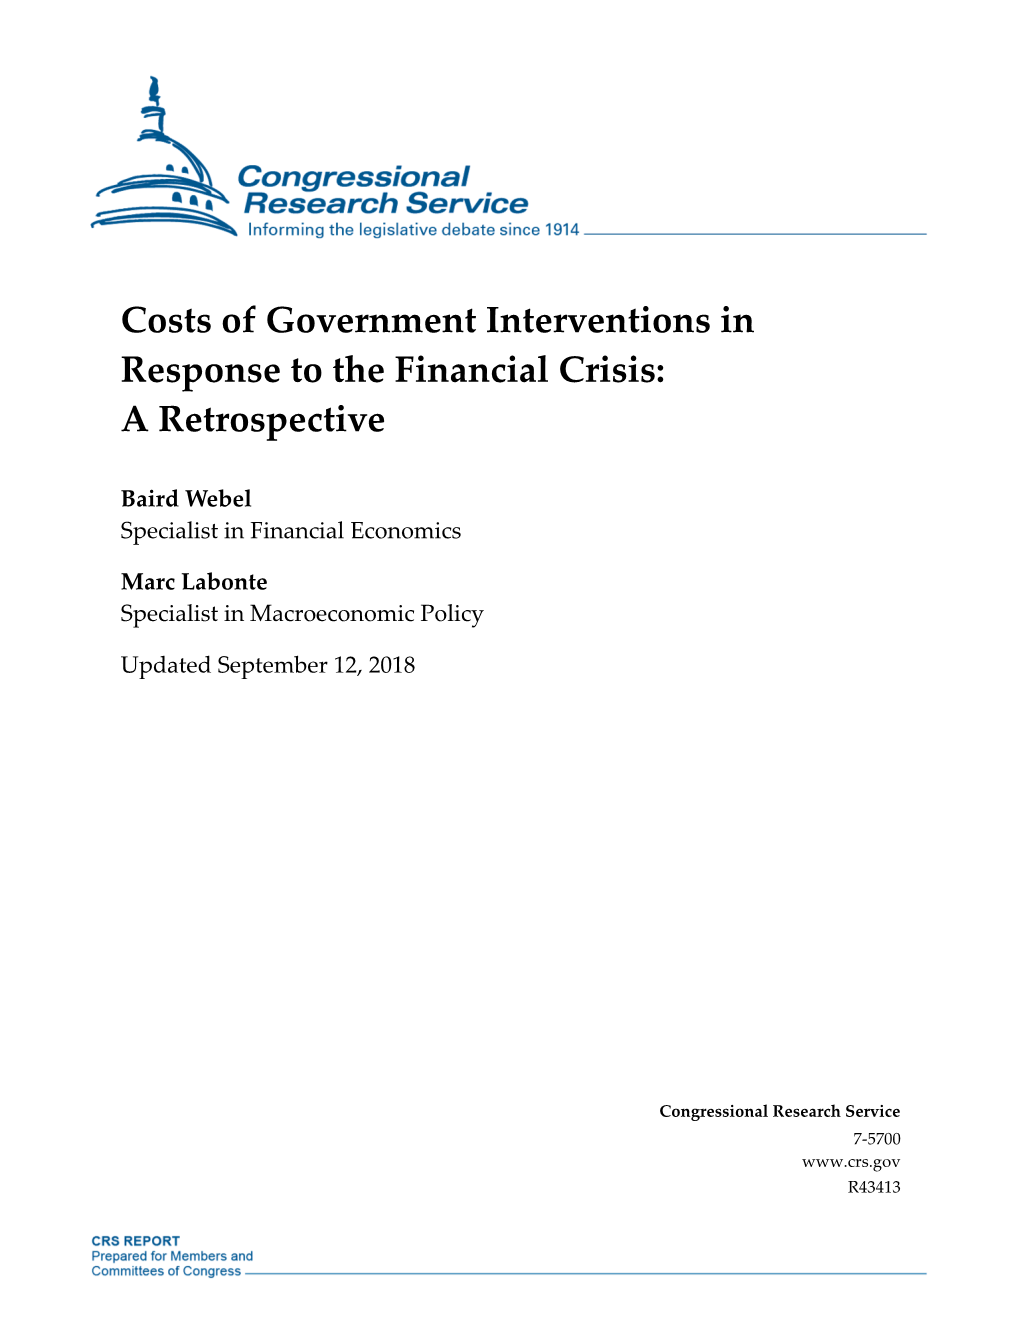 Costs of Government Interventions in Response to the Financial Crisis: a Retrospective